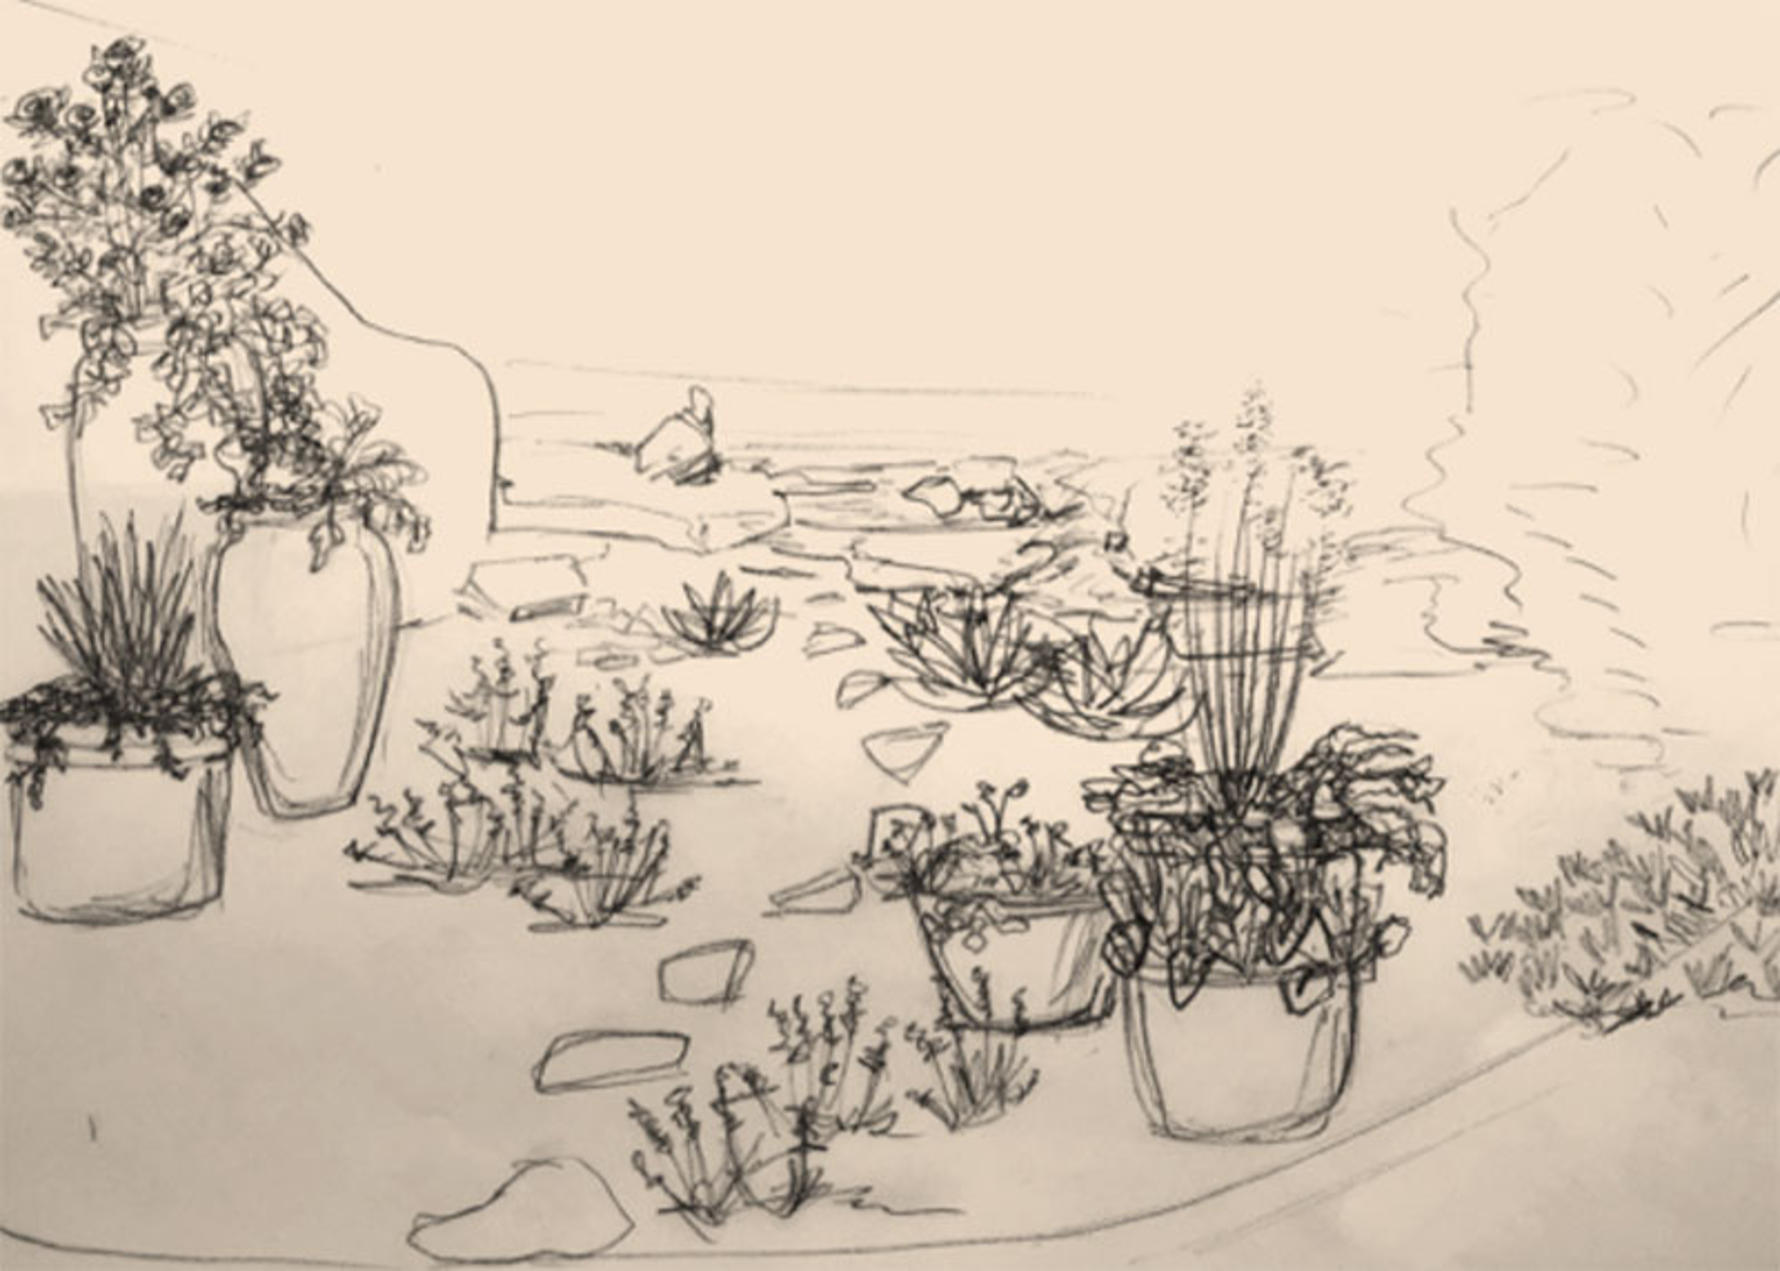 Plantscape design sketch of a backyard with a path and pottery